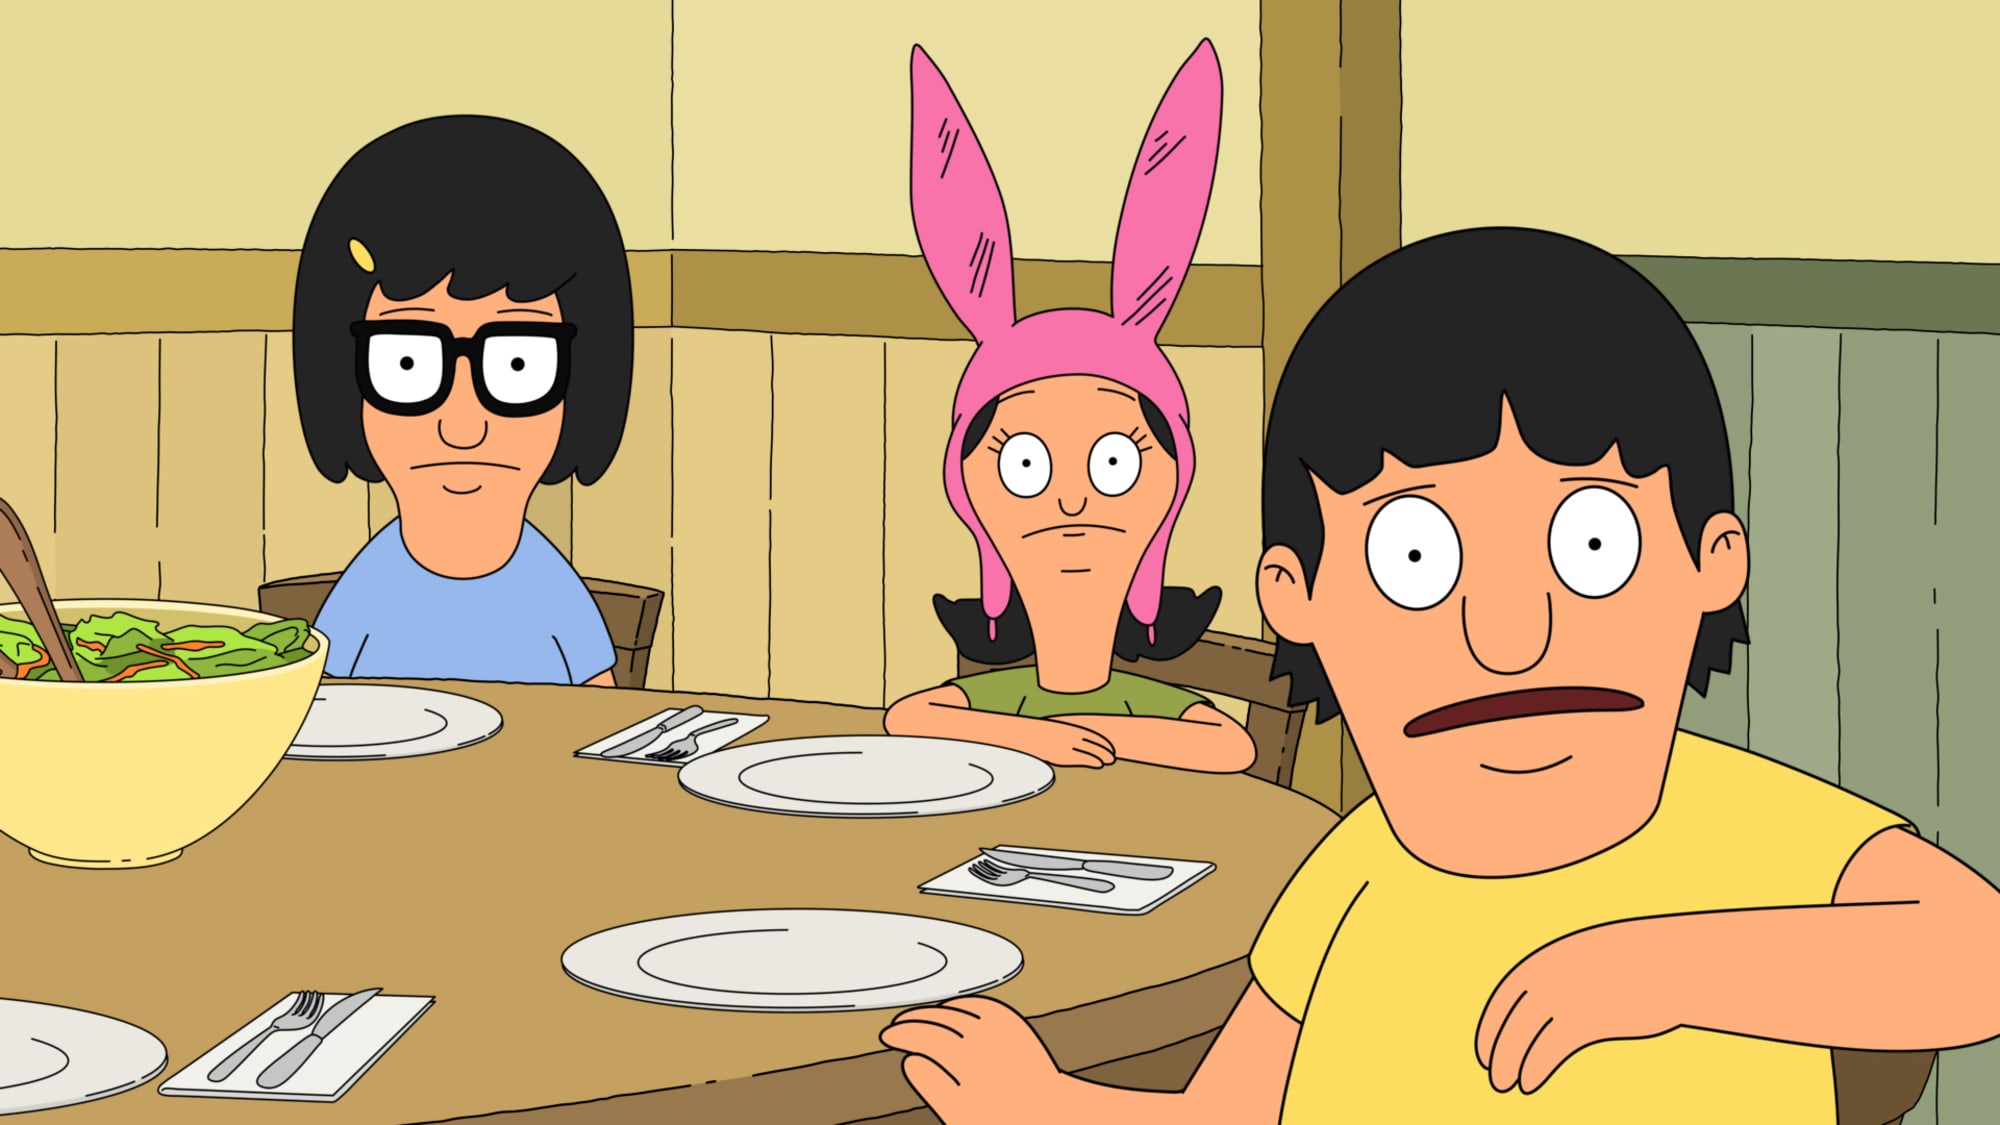 Why is Bob's Burgers not as popular as other animated show?